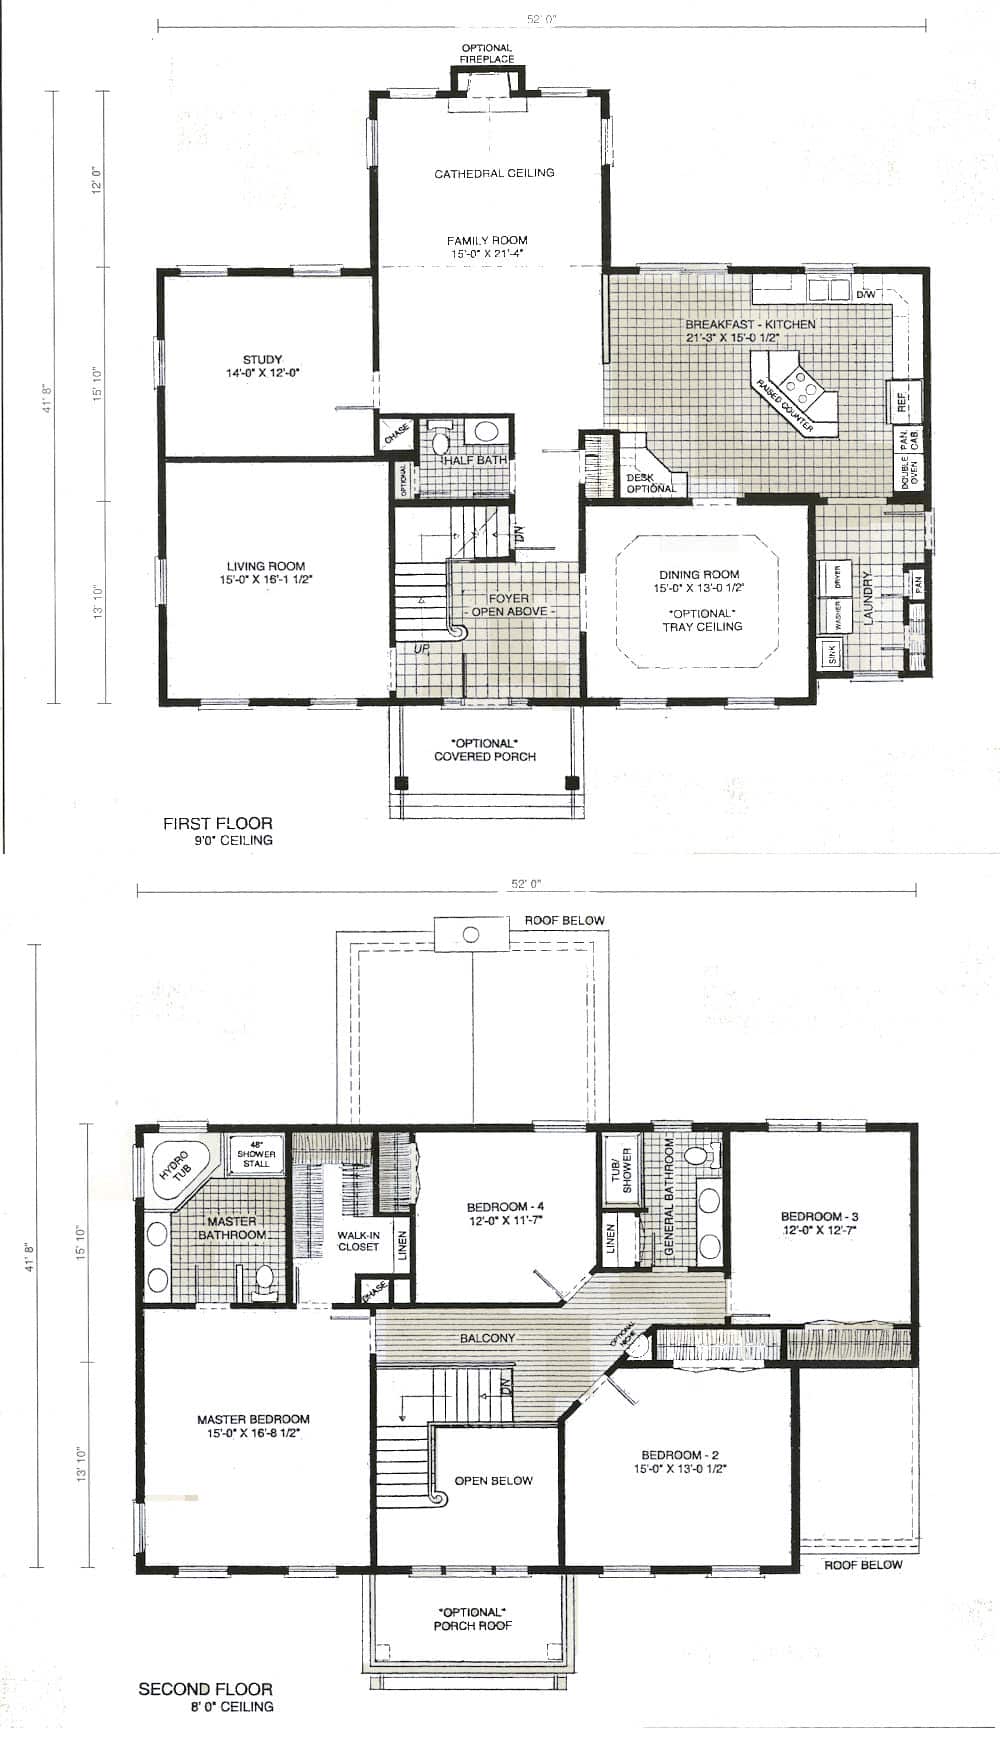 The Georgetown Two Story Colonial Home Floor Plans